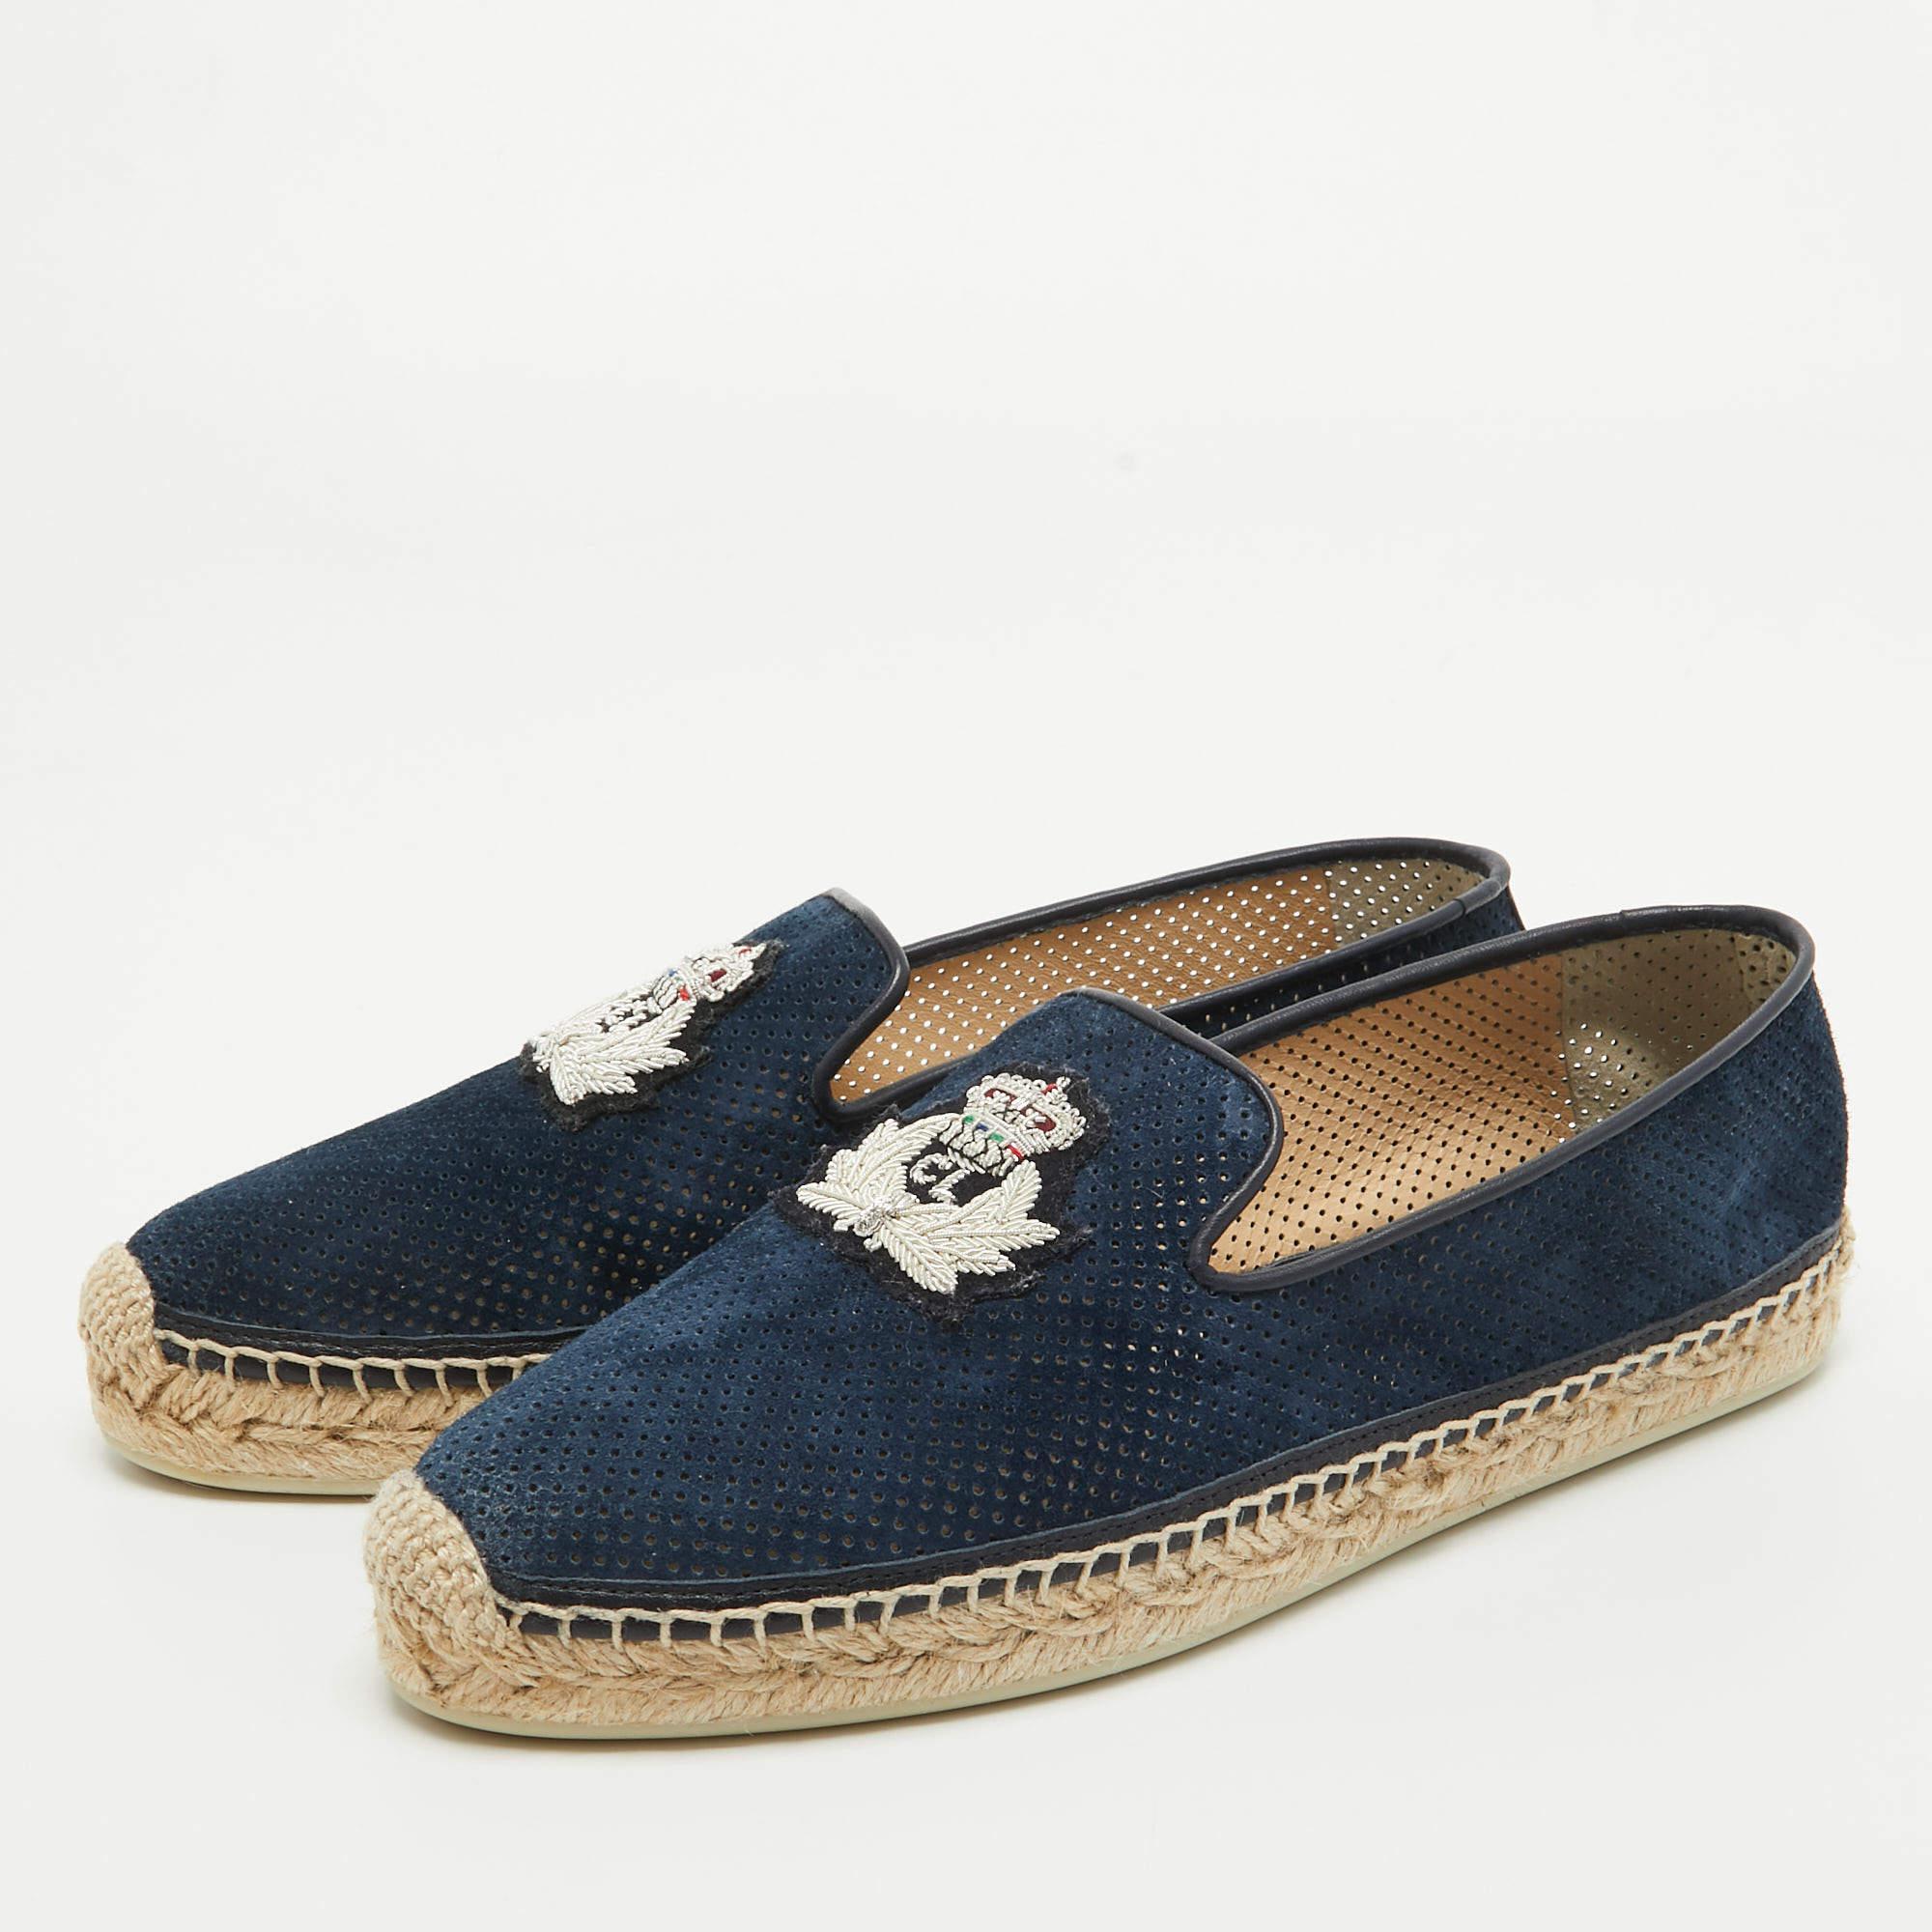 Christian Louboutin Blue Perforated Suede Nanou Orlato Espadrille Flats Size 37 For Sale 4